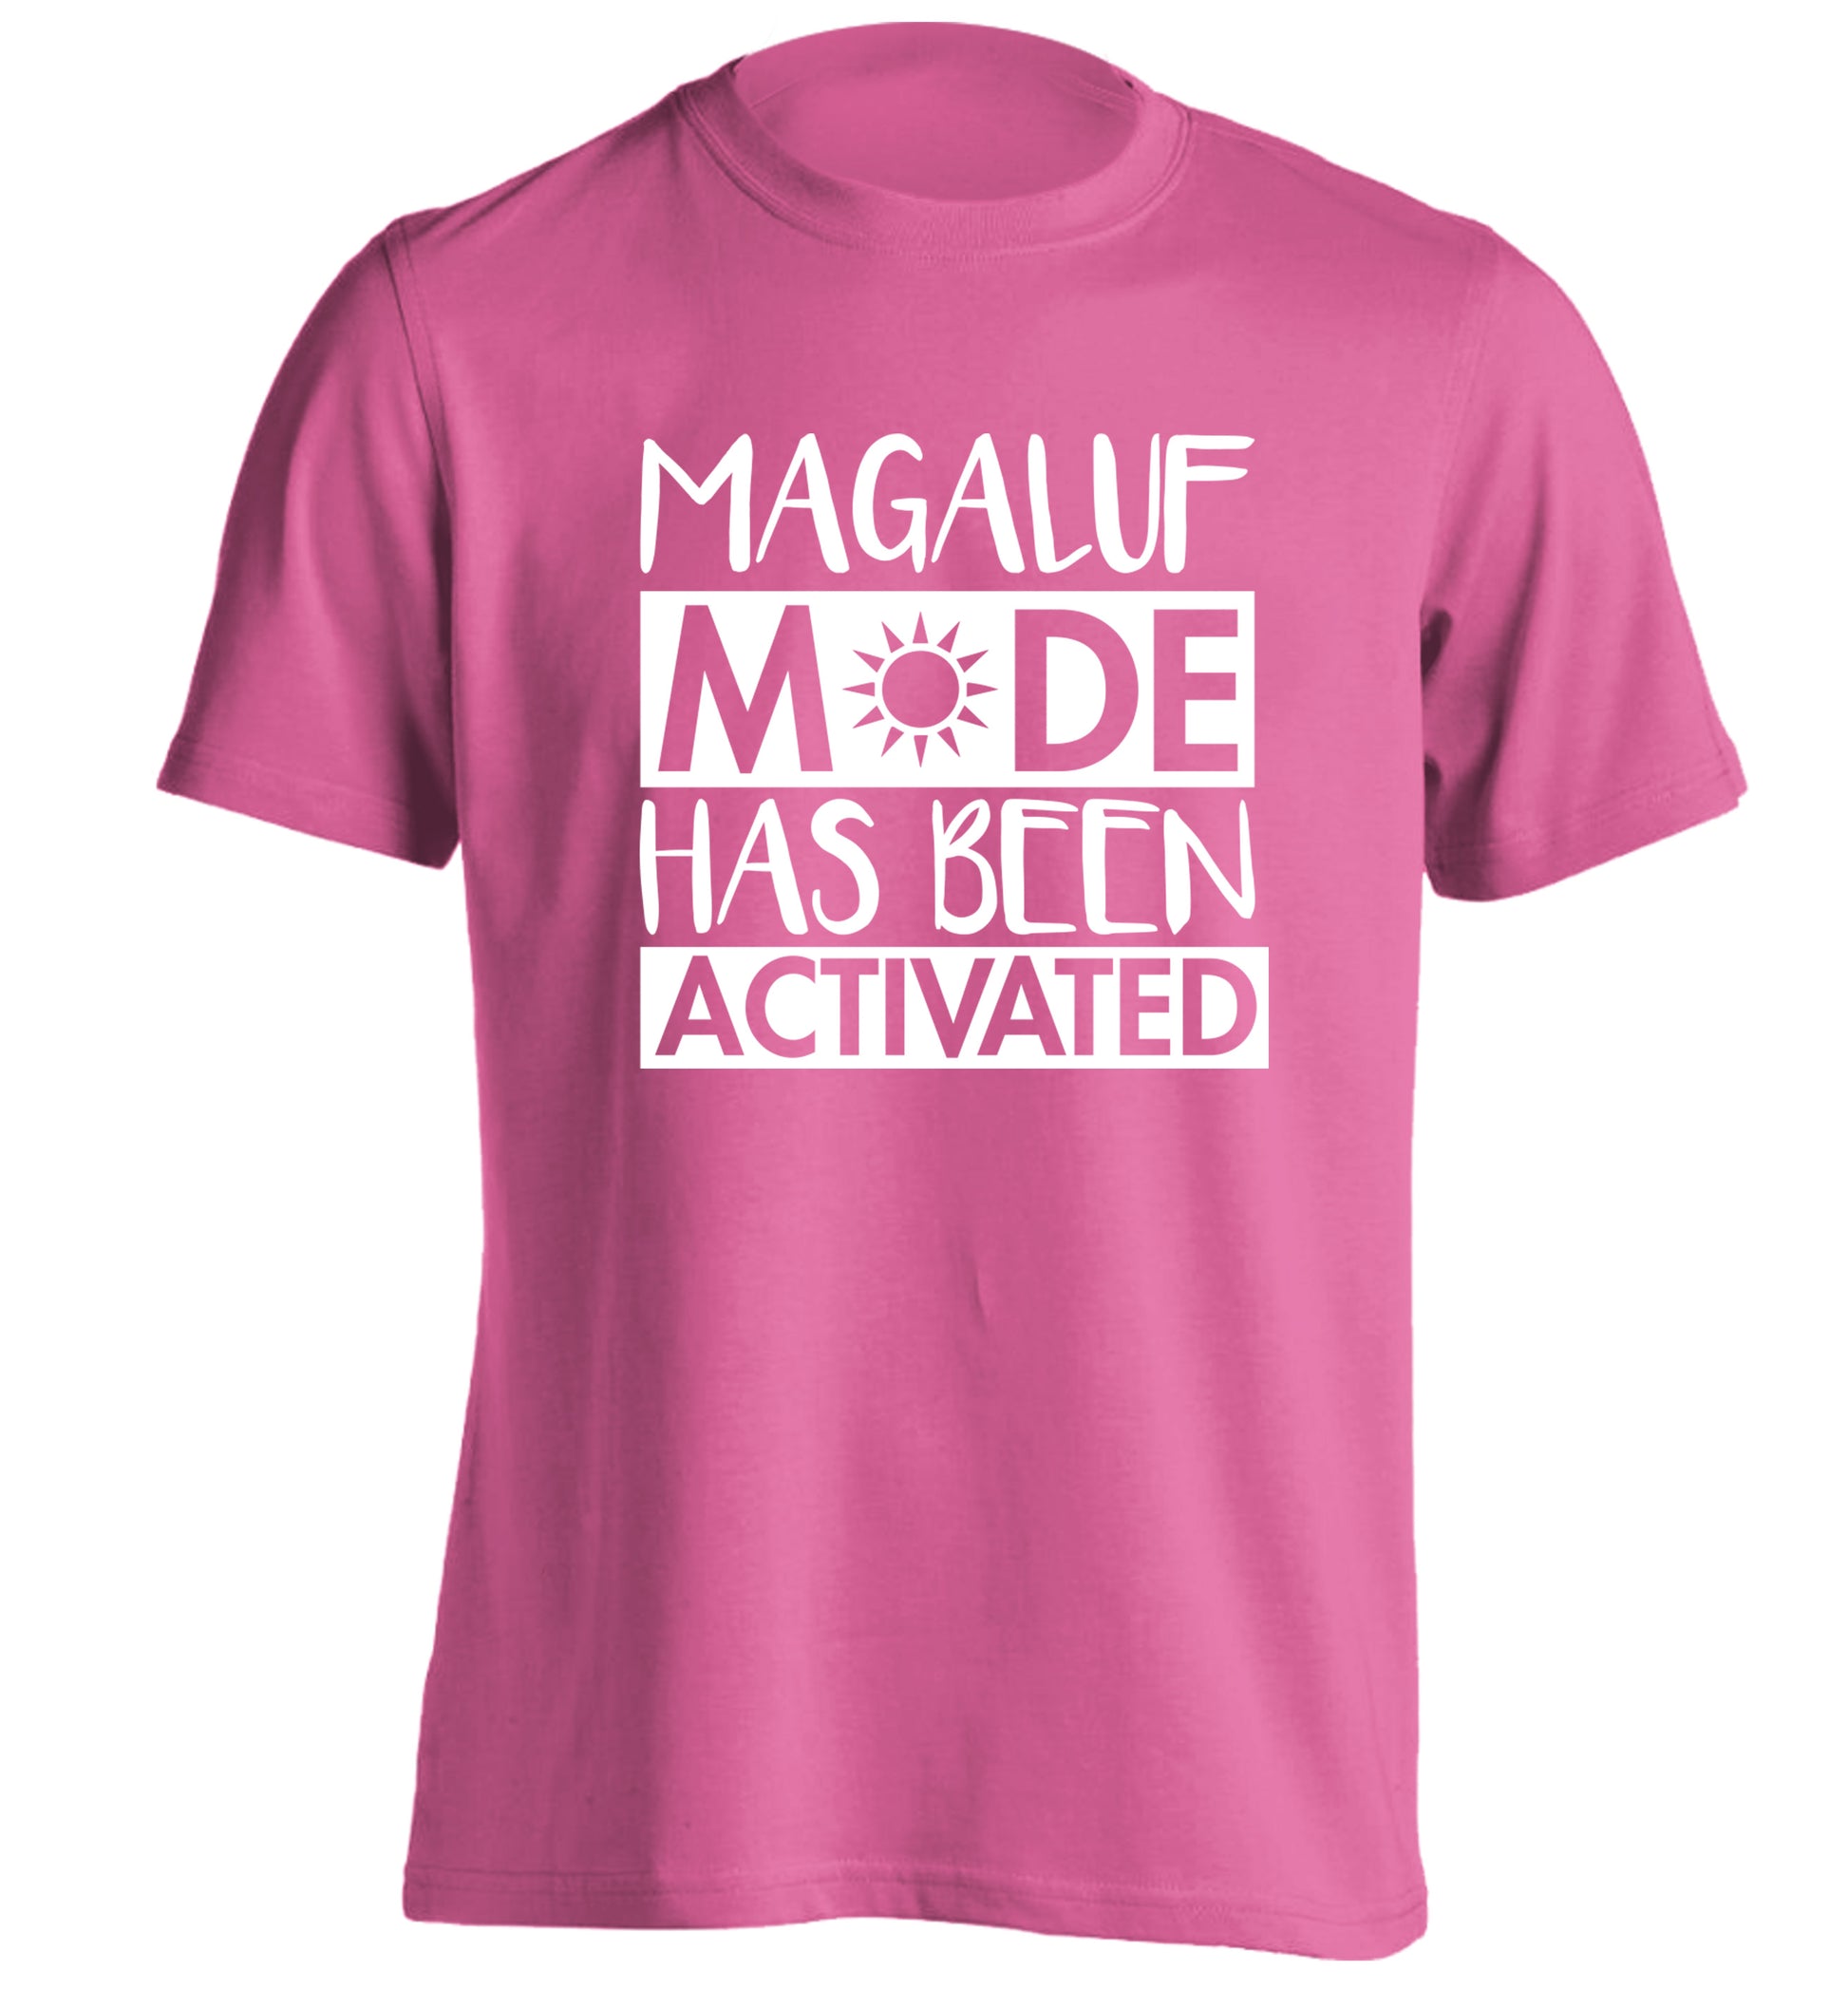 Magaluf mode has been activated adults unisex pink Tshirt 2XL